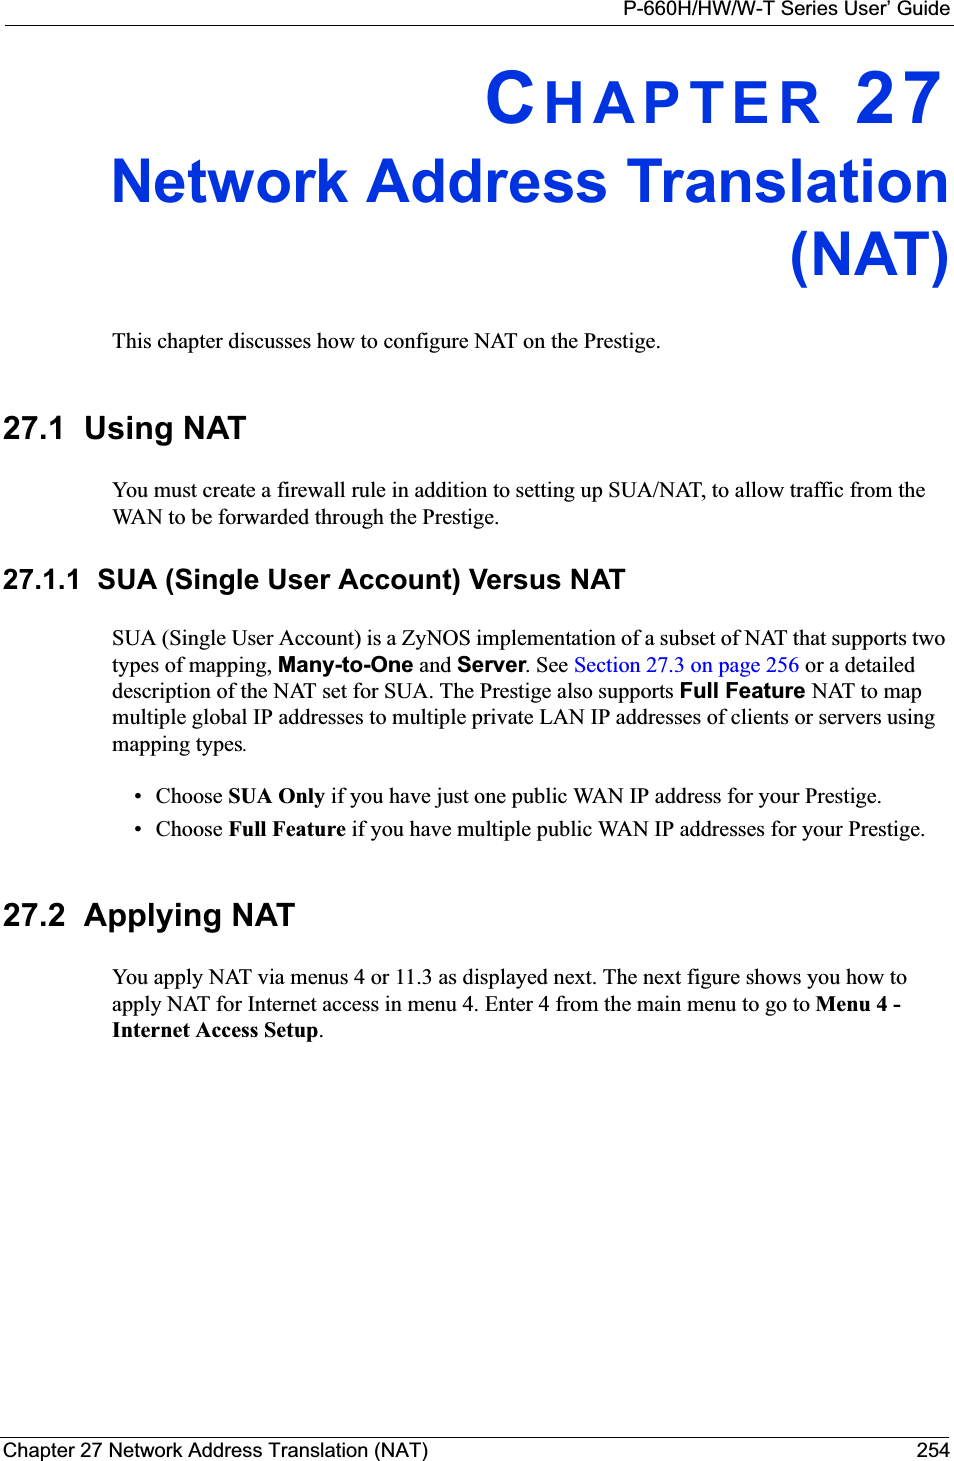 P-660H/HW/W-T Series User’ GuideChapter 27 Network Address Translation (NAT) 254CHAPTER 27Network Address Translation(NAT)This chapter discusses how to configure NAT on the Prestige.27.1  Using NATYou must create a firewall rule in addition to setting up SUA/NAT, to allow traffic from the WAN to be forwarded through the Prestige.27.1.1  SUA (Single User Account) Versus NATSUA (Single User Account) is a ZyNOS implementation of a subset of NAT that supports two types of mapping, Many-to-One and Server. See Section 27.3 on page 256 or a detailed description of the NAT set for SUA. The Prestige also supports Full Feature NAT to map multiple global IP addresses to multiple private LAN IP addresses of clients or servers using mapping types.• Choose SUA Only if you have just one public WAN IP address for your Prestige.• Choose Full Feature if you have multiple public WAN IP addresses for your Prestige.27.2  Applying NATYou apply NAT via menus 4 or 11.3 as displayed next. The next figure shows you how to apply NAT for Internet access in menu 4. Enter 4 from the main menu to go to Menu 4 - Internet Access Setup.